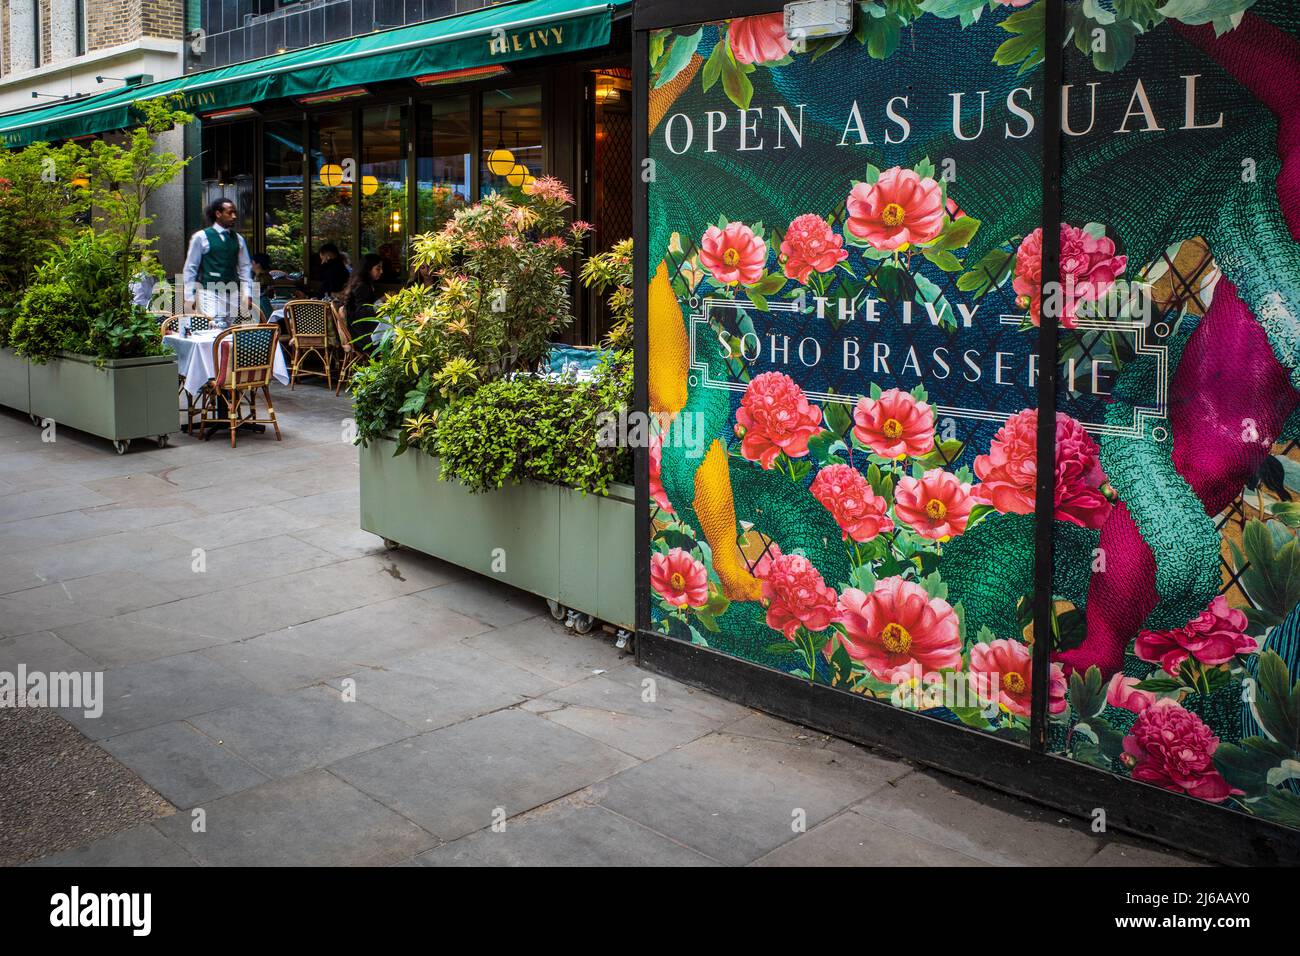 The Ivy Soho Brasserie - The Ivy Restaurant on Broadwick Street Soho Central London Banque D'Images